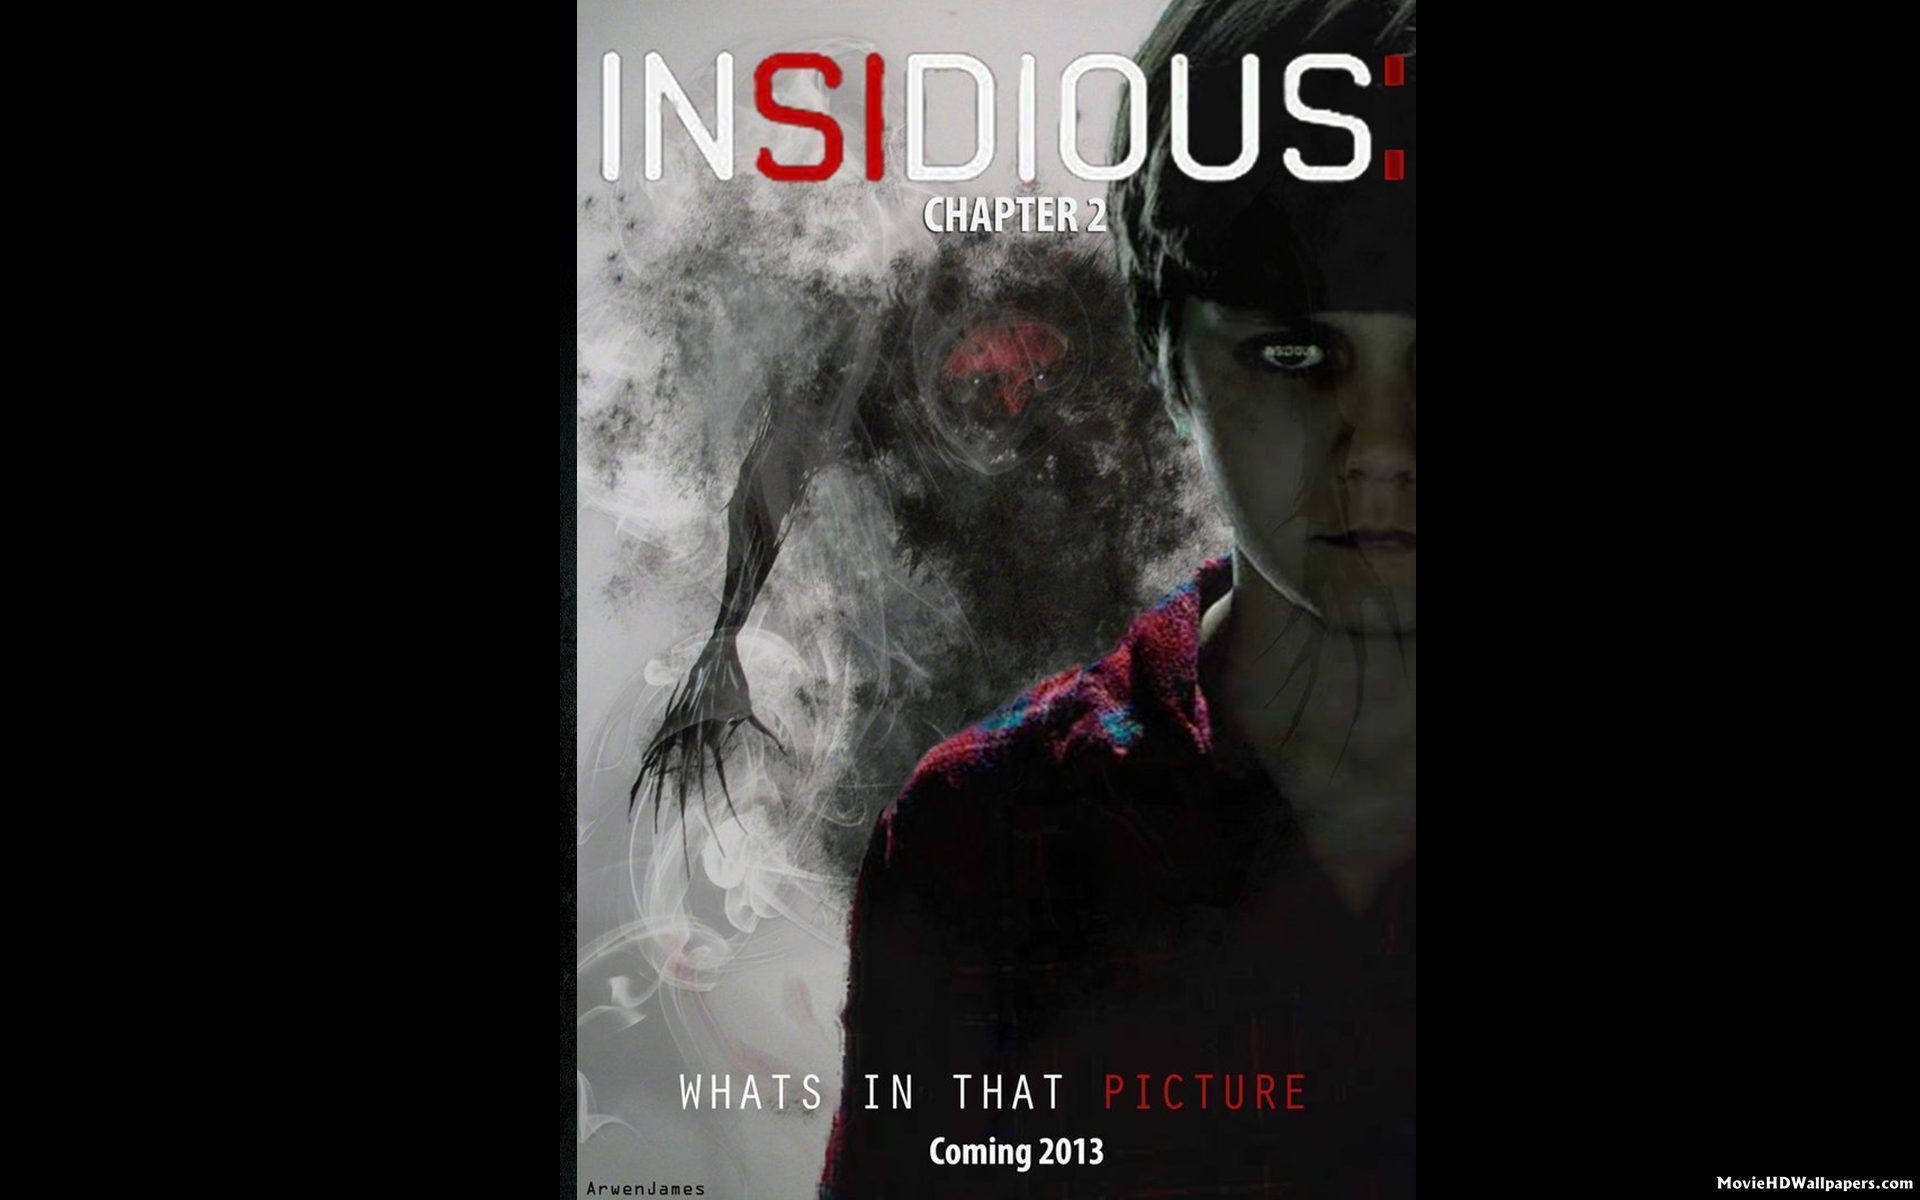 Mysterious Entity From Insidious Wallpaper